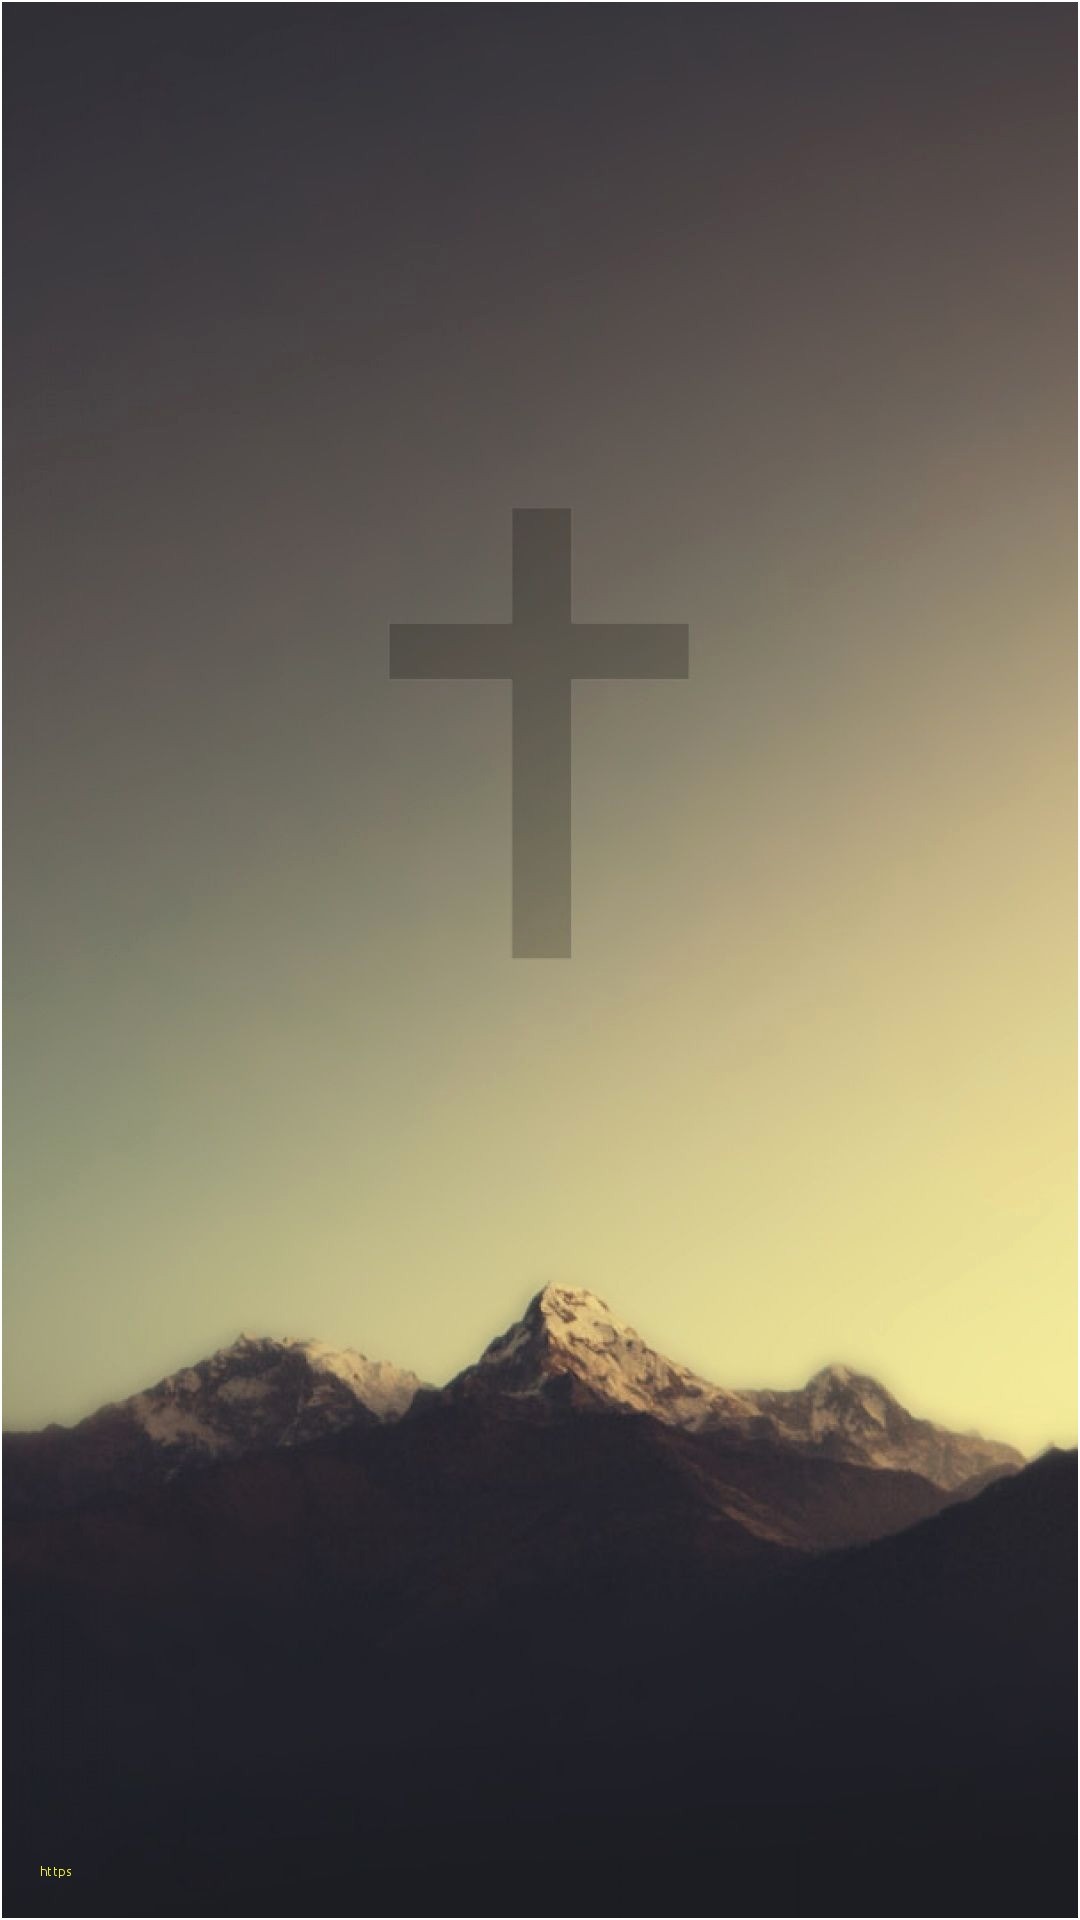 1080x1920 ... Jesus Wallpaper Hd Awesome IPhone Wallpaper Jesus Elegant Christian  Wallpaper IPhone Wallpaper ...